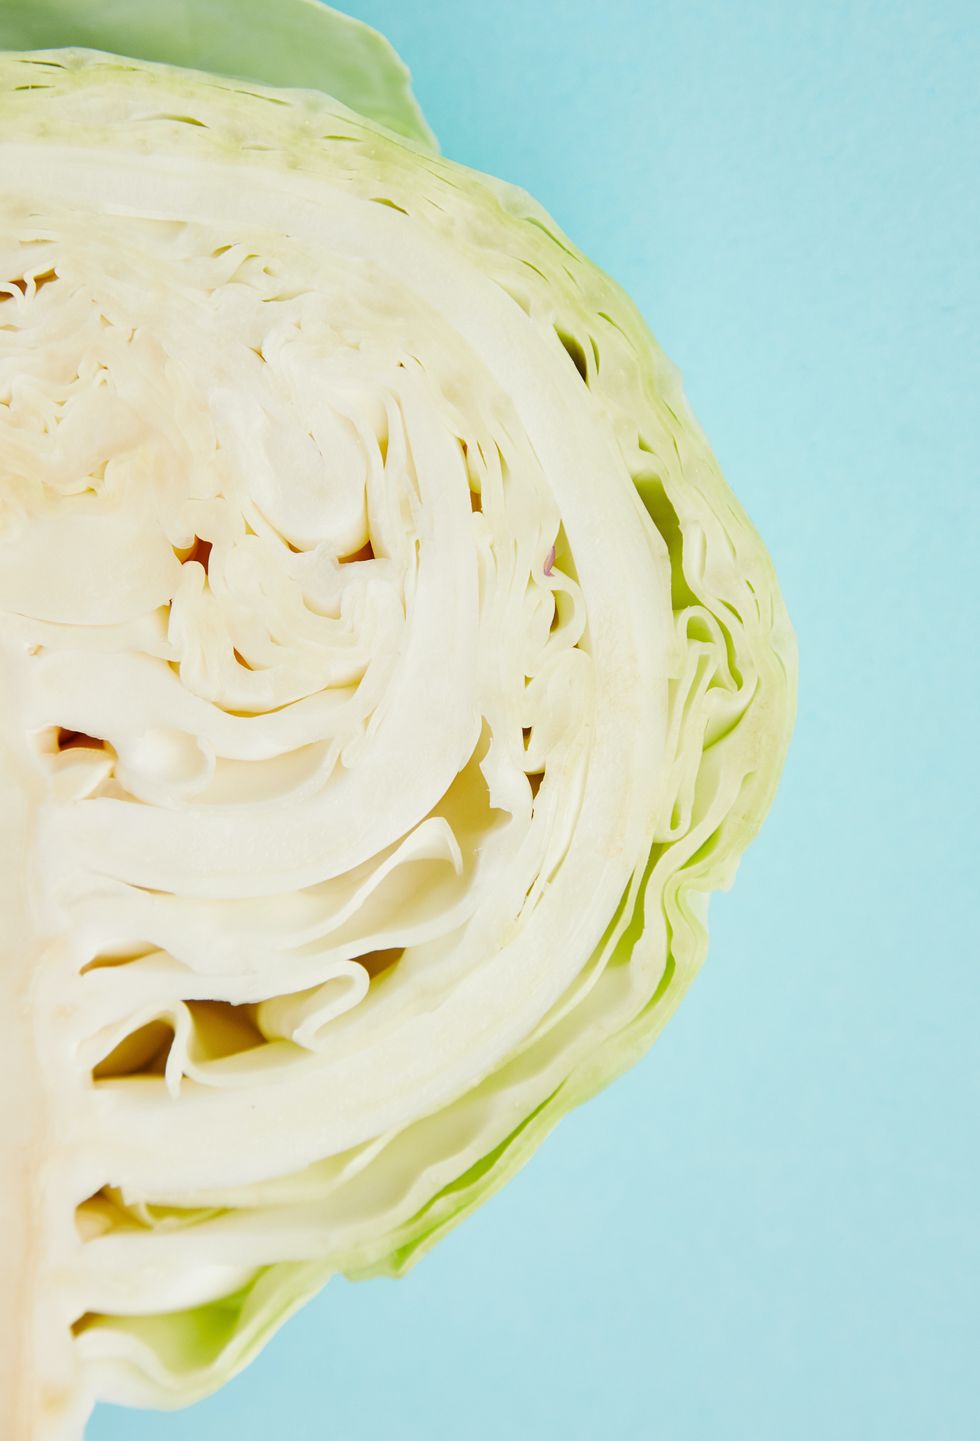 Cabbage close up on a light blue background